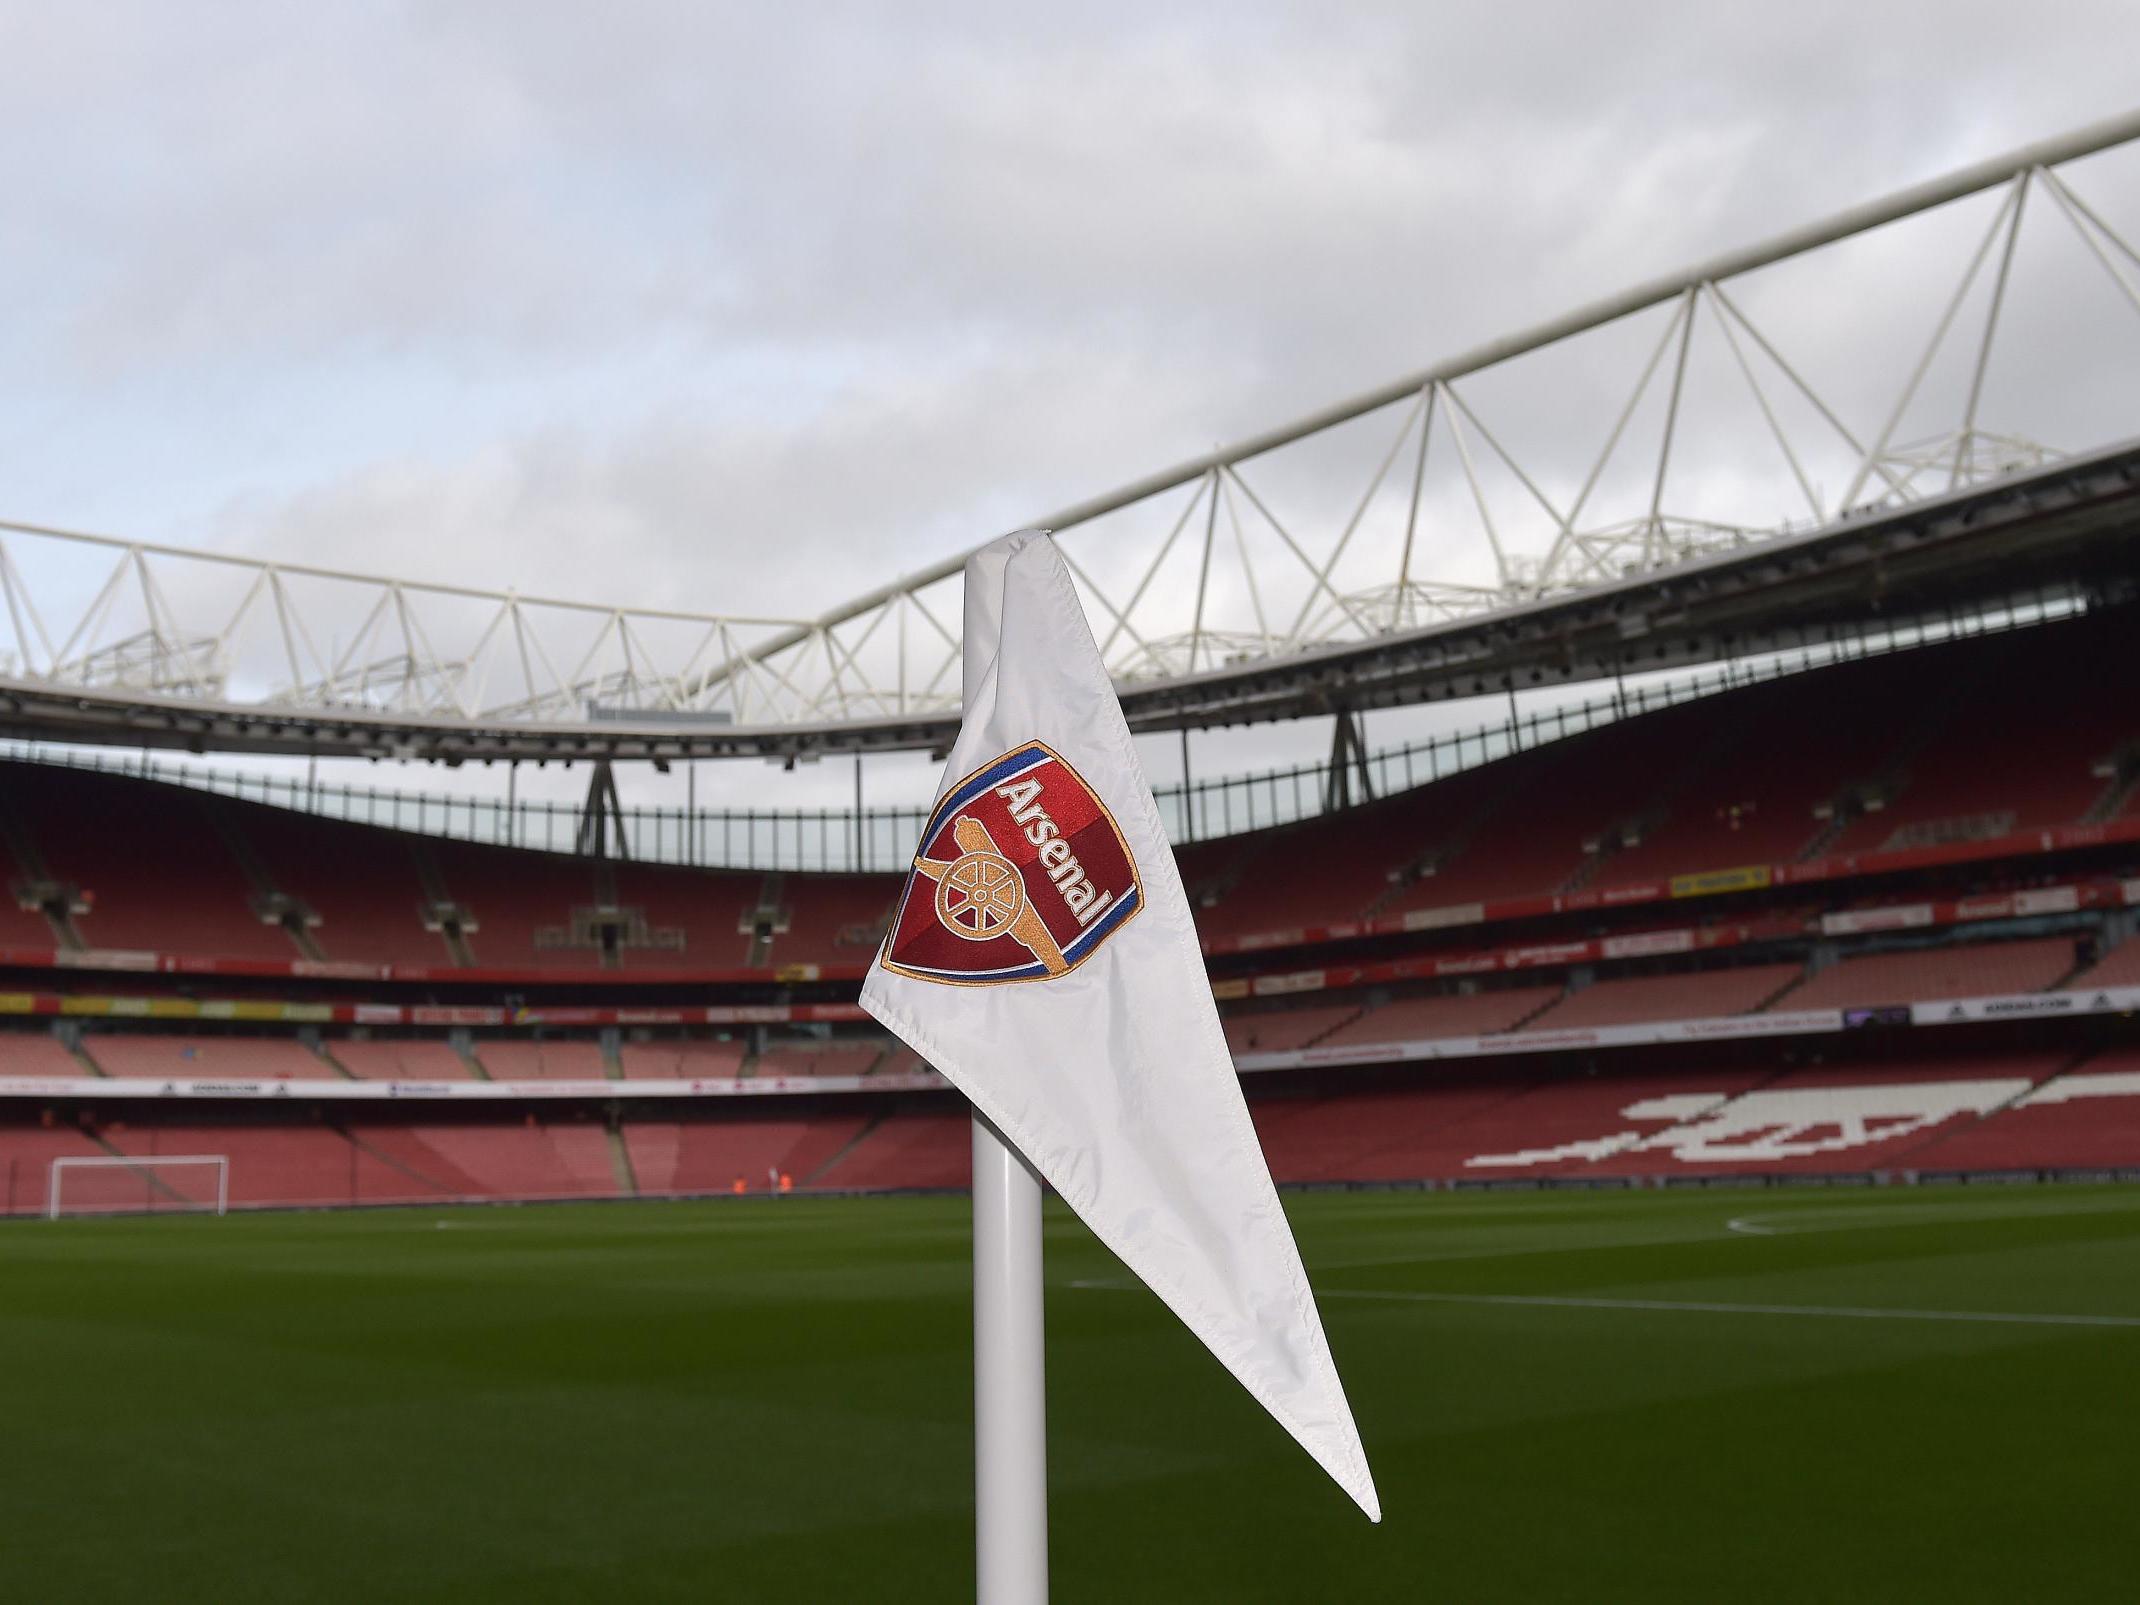 Arsenal vs Norwich LIVE: Team news, line-ups and more ahead of Premier League fixture today